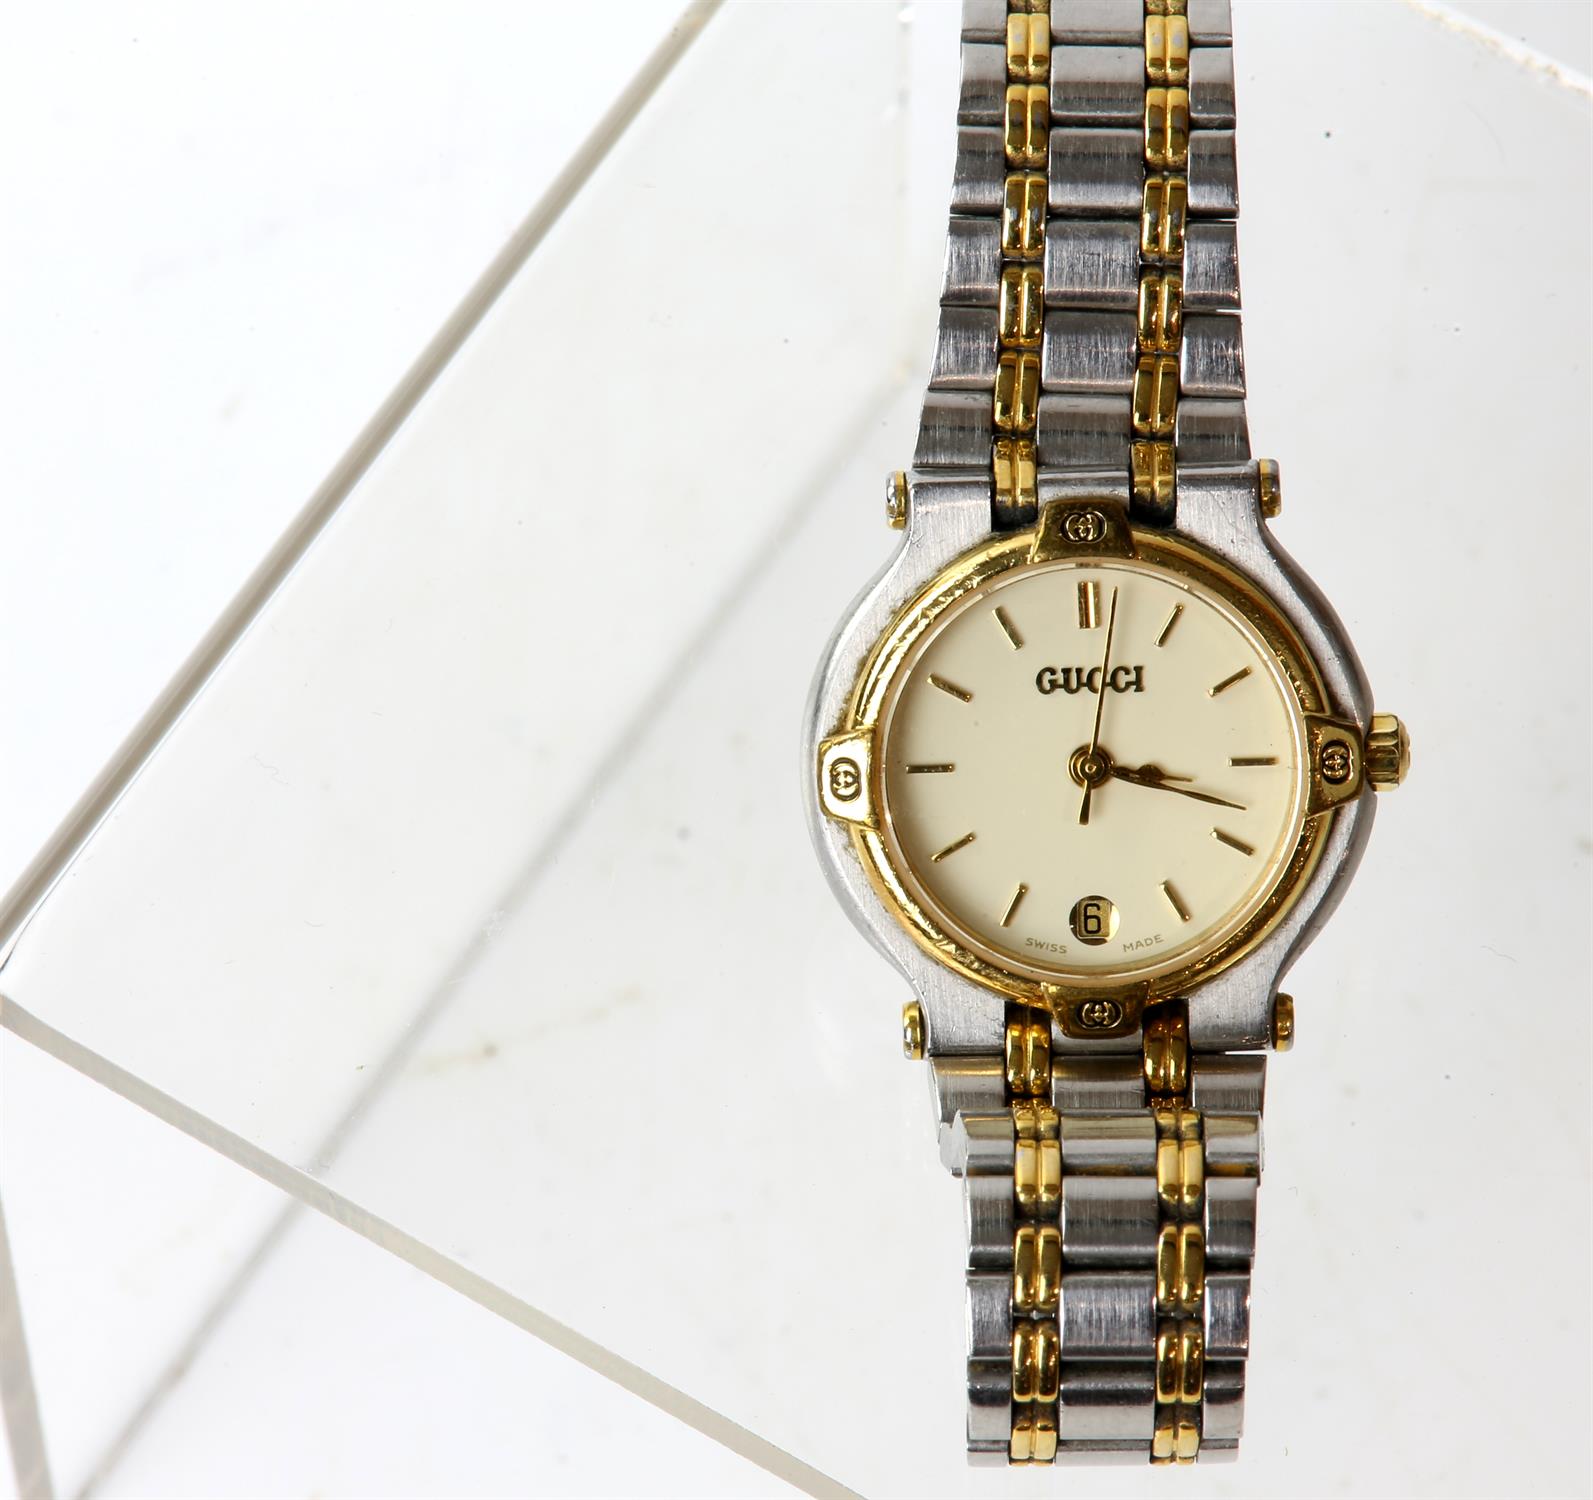 Ladies Gucci wristwatch, model 9000L, with circular cream dial, baton hour markers, - Image 5 of 6